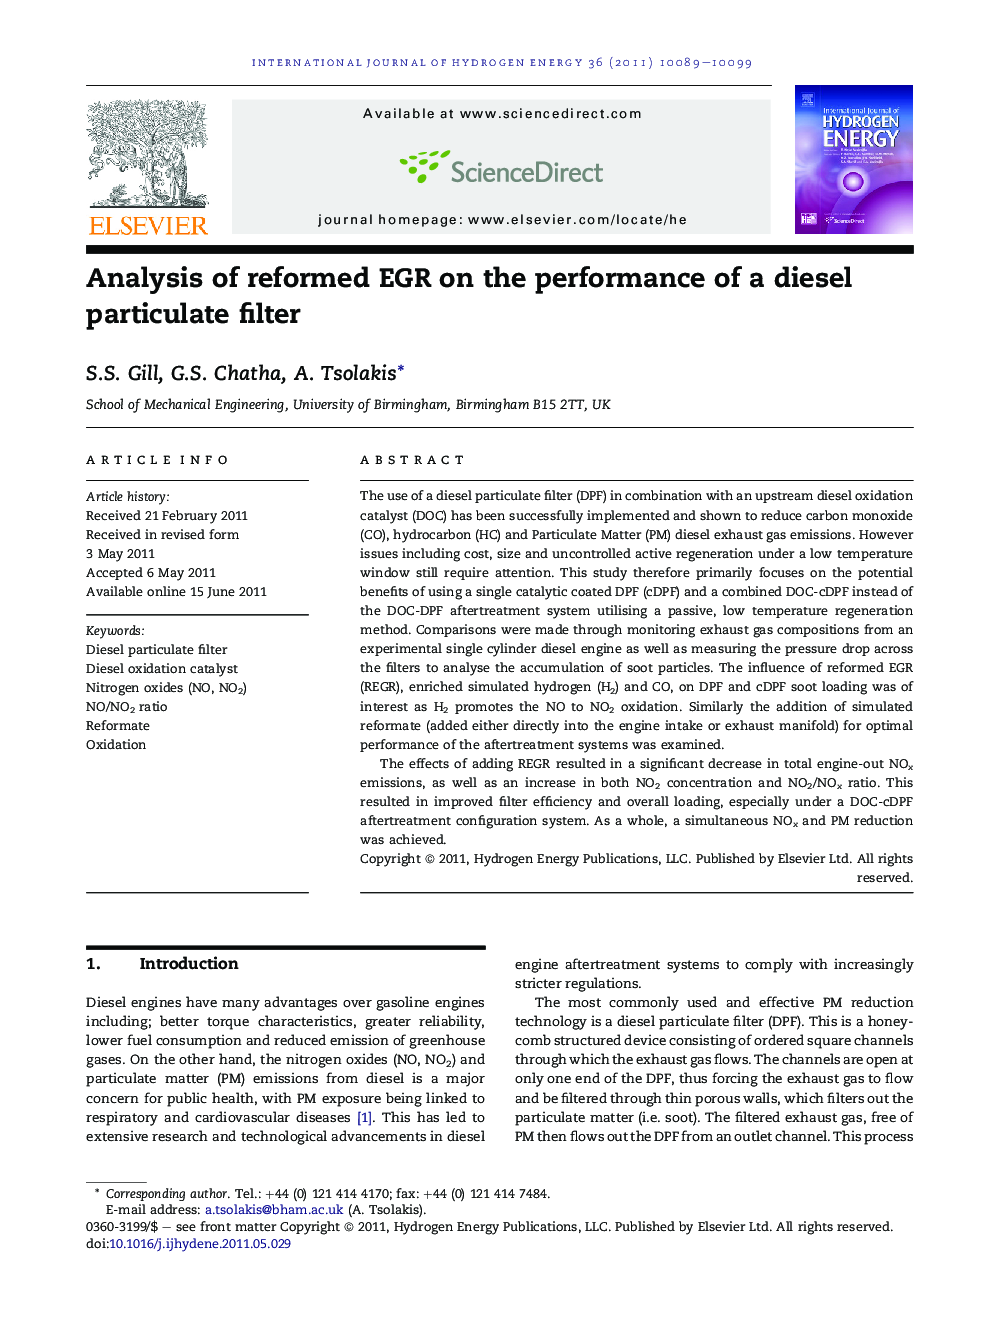 Analysis of reformed EGR on the performance of a diesel particulate filter